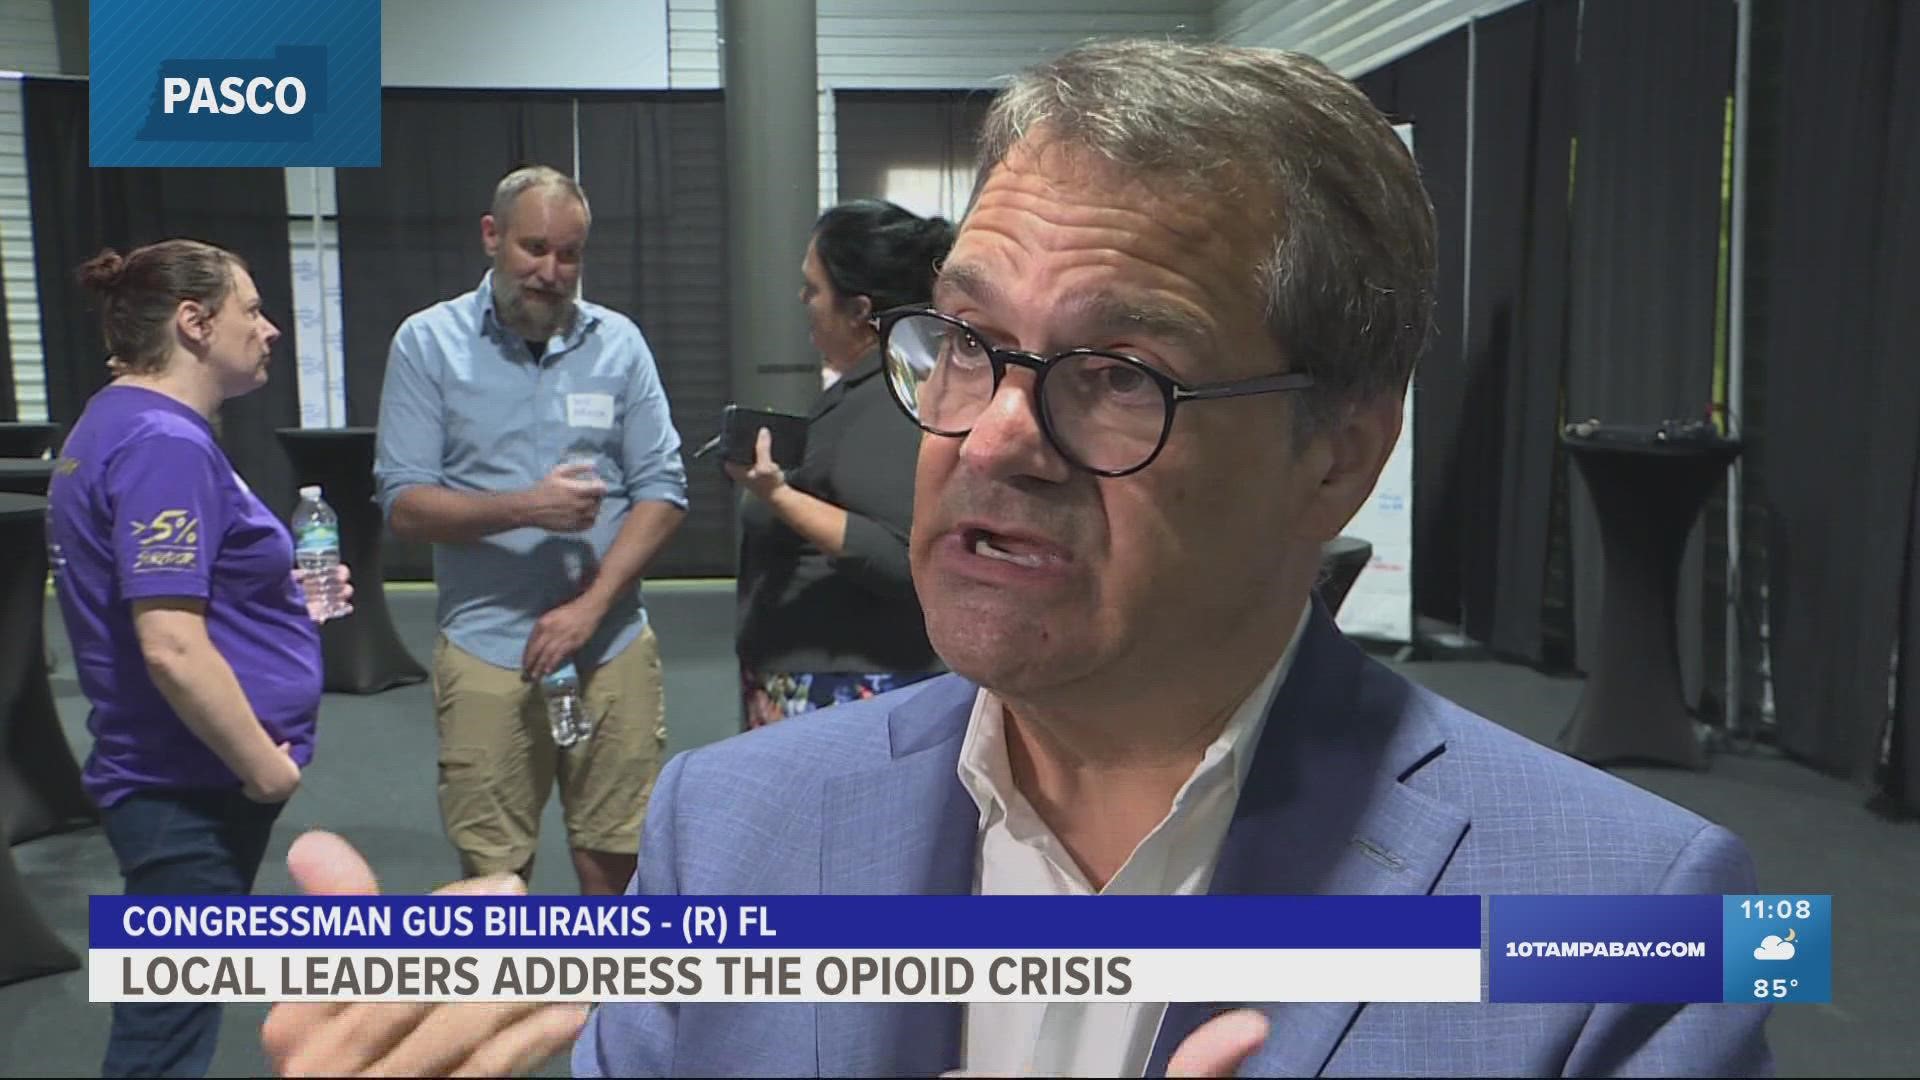 Congressman Bilirakis attended a Pasco County meeting with business leaders and community members to discuss what they need to do to stop the opioid crisis.